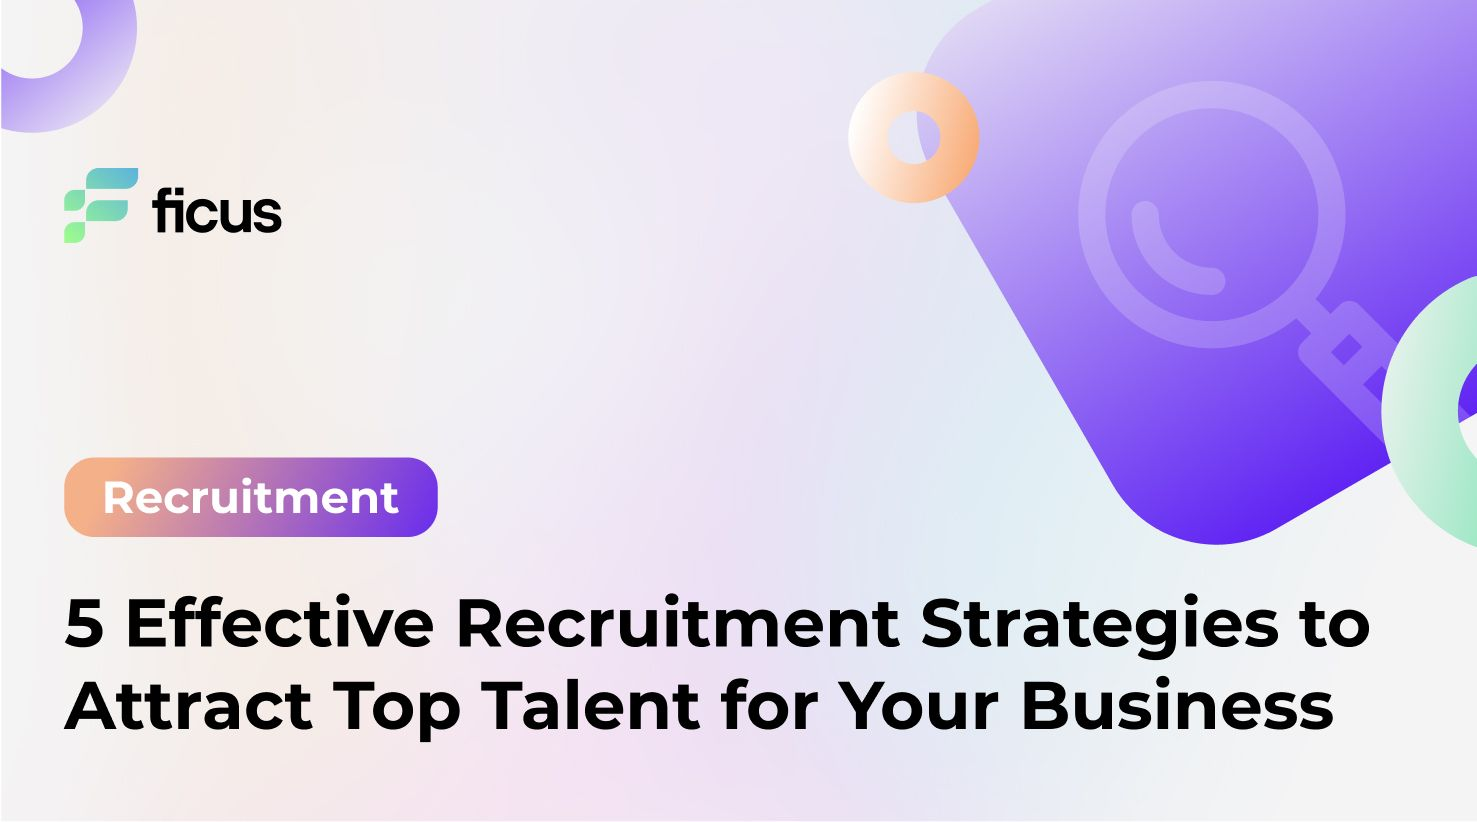 5 Effective Recruitment Strategies to Attract Top Talent for Your Business